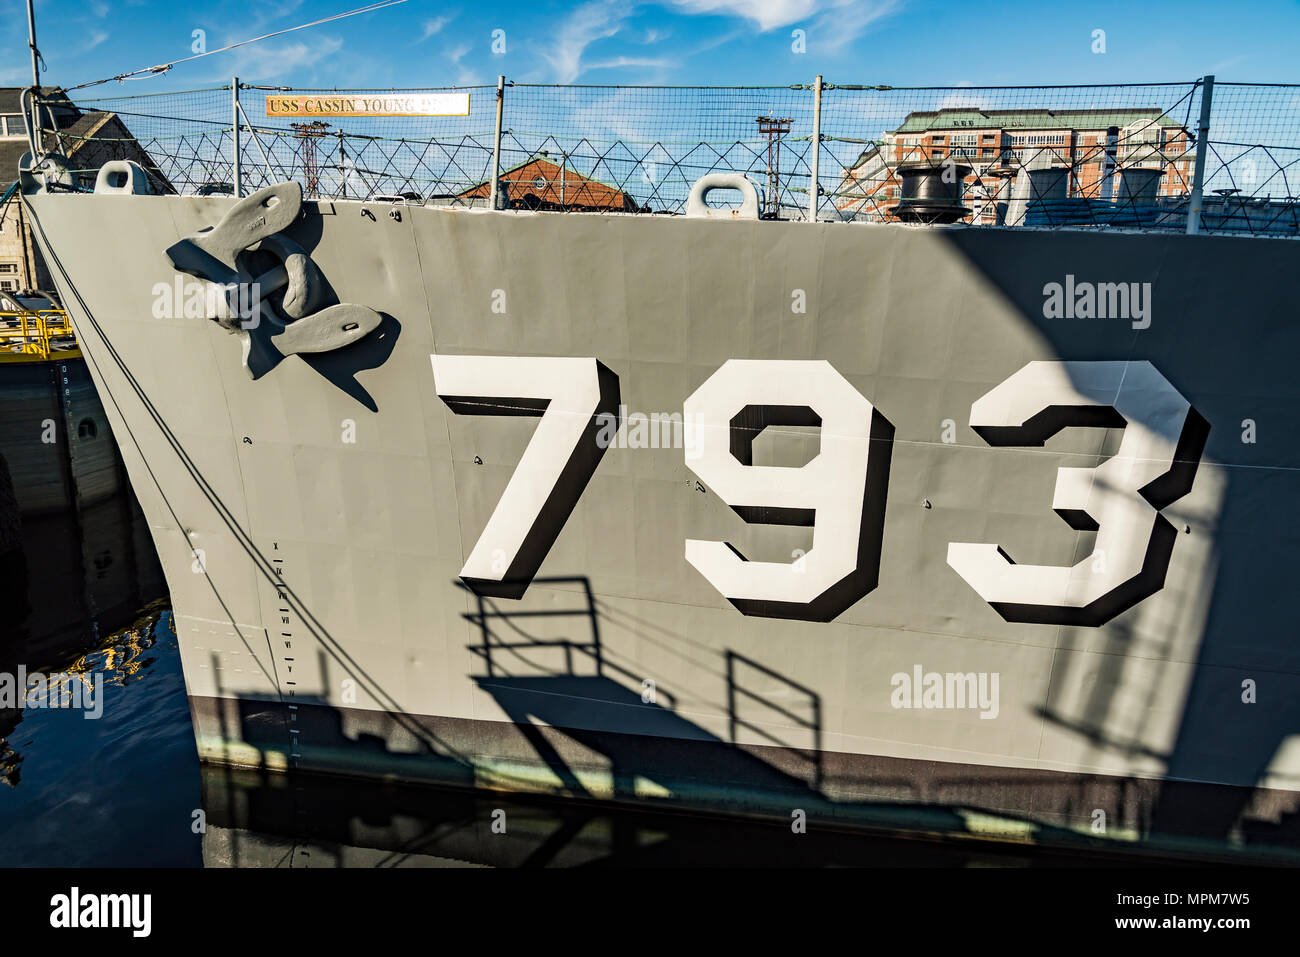 USS Cassin Young JJ-793 Charlestown Navy Yard, Boston Banque D'Images